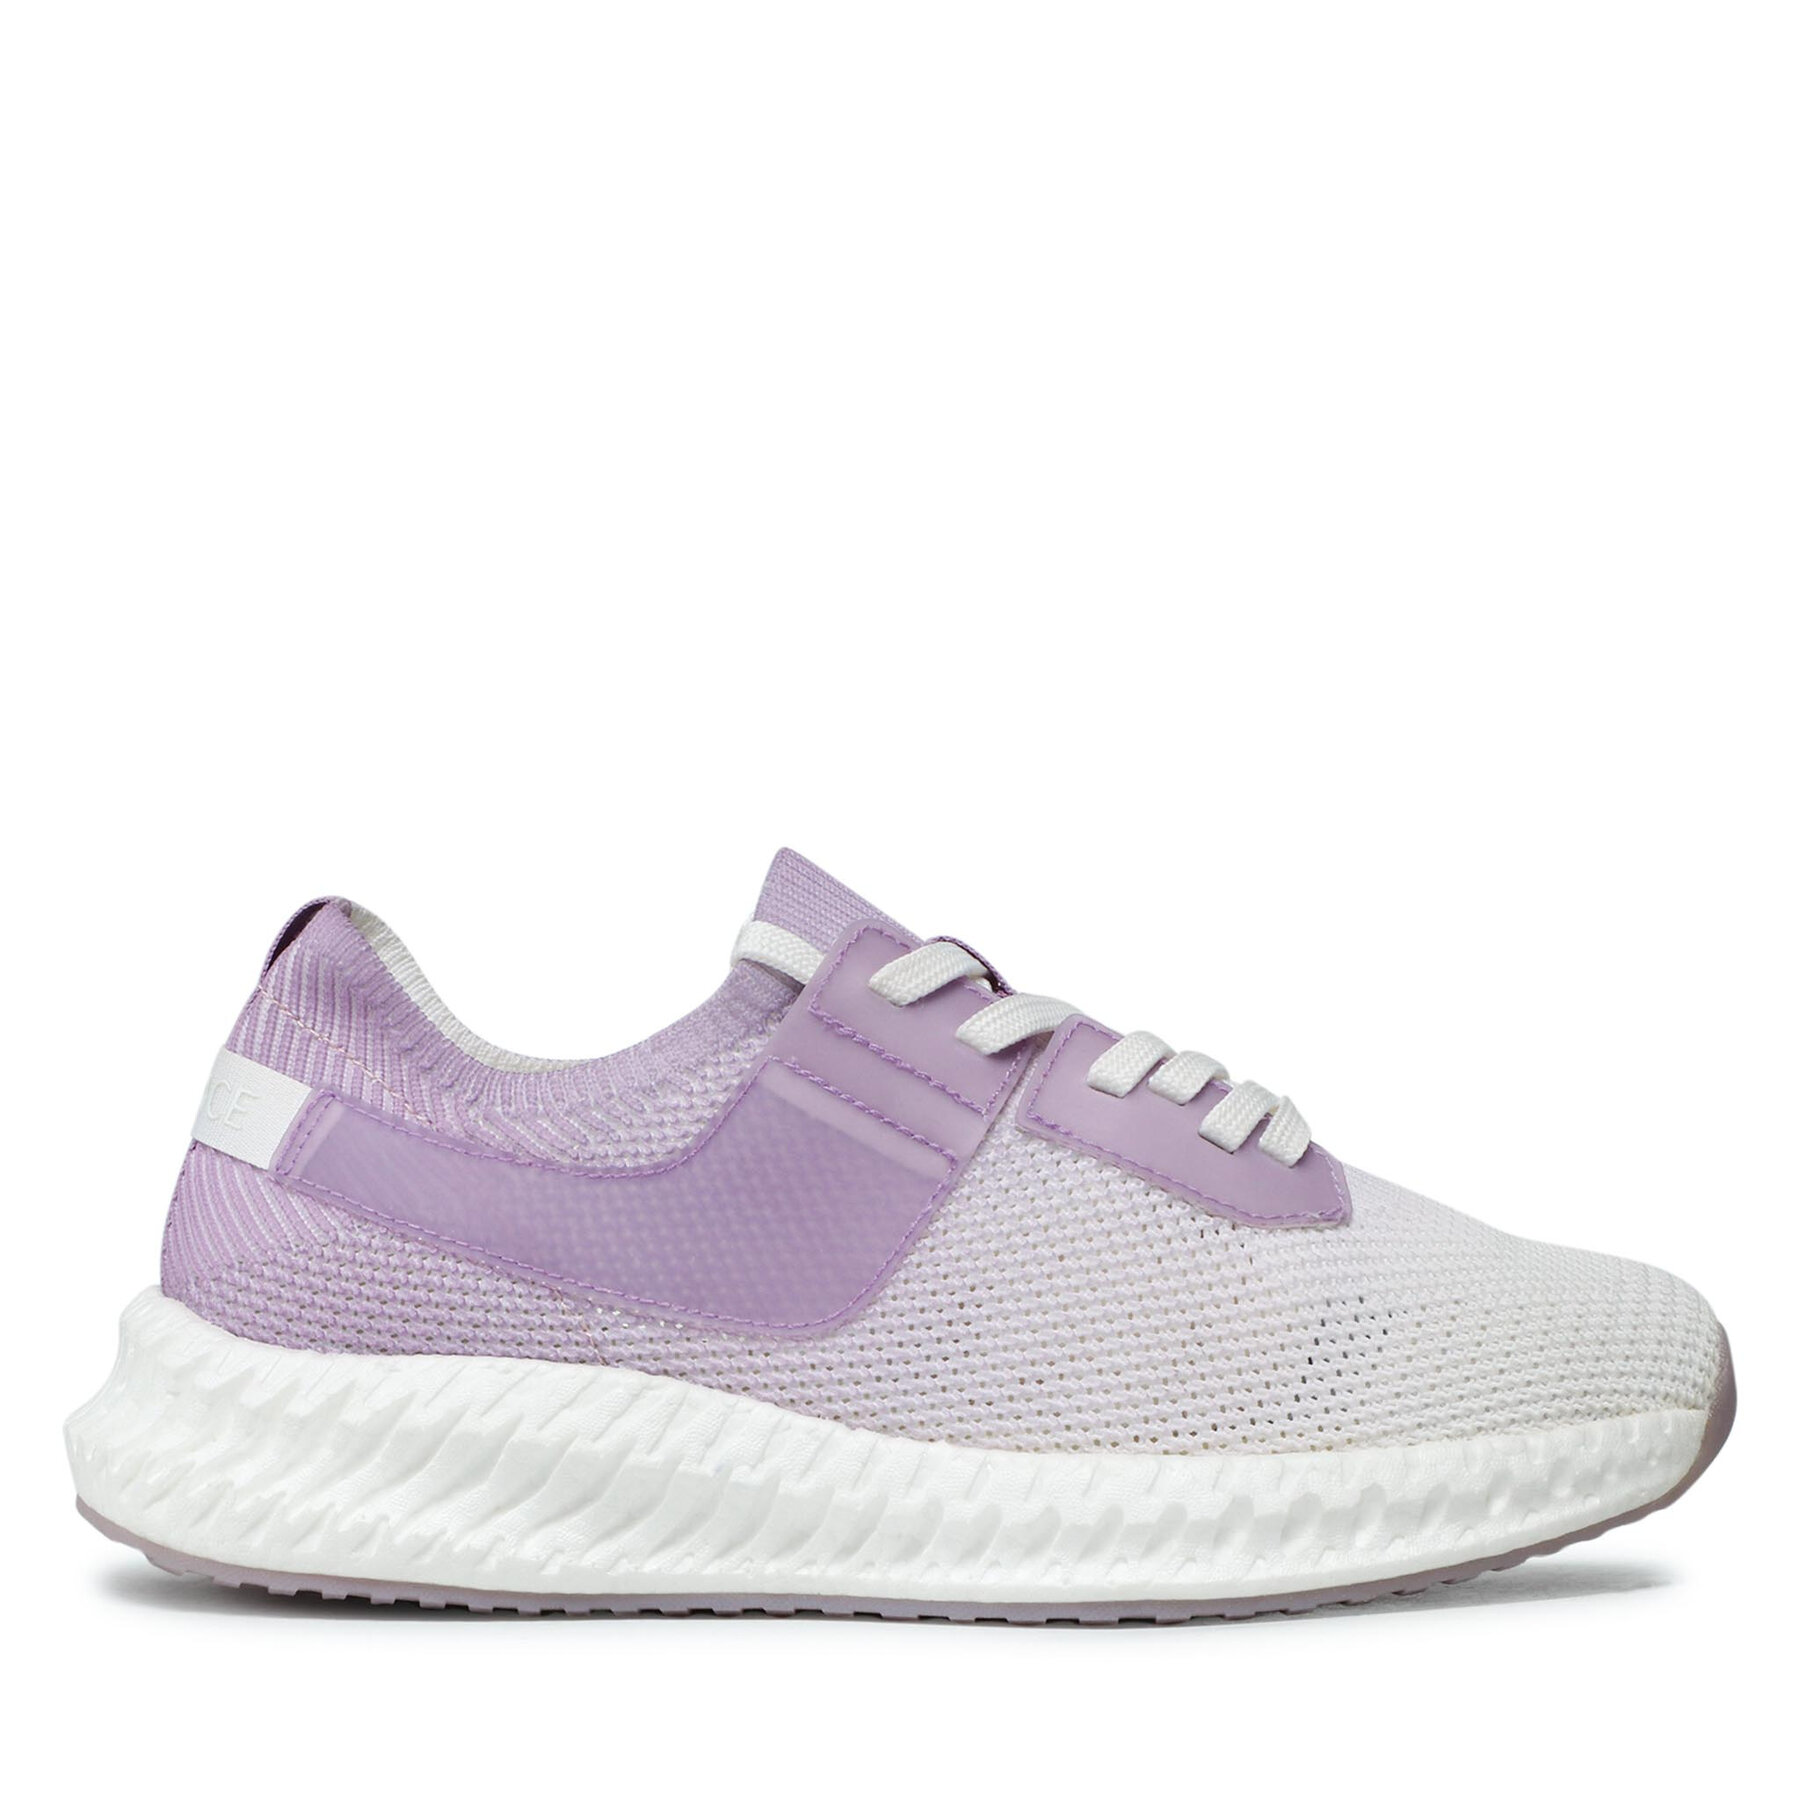 Sneakers Caprice 9-23703-28 Lilac Knit 534 von Caprice